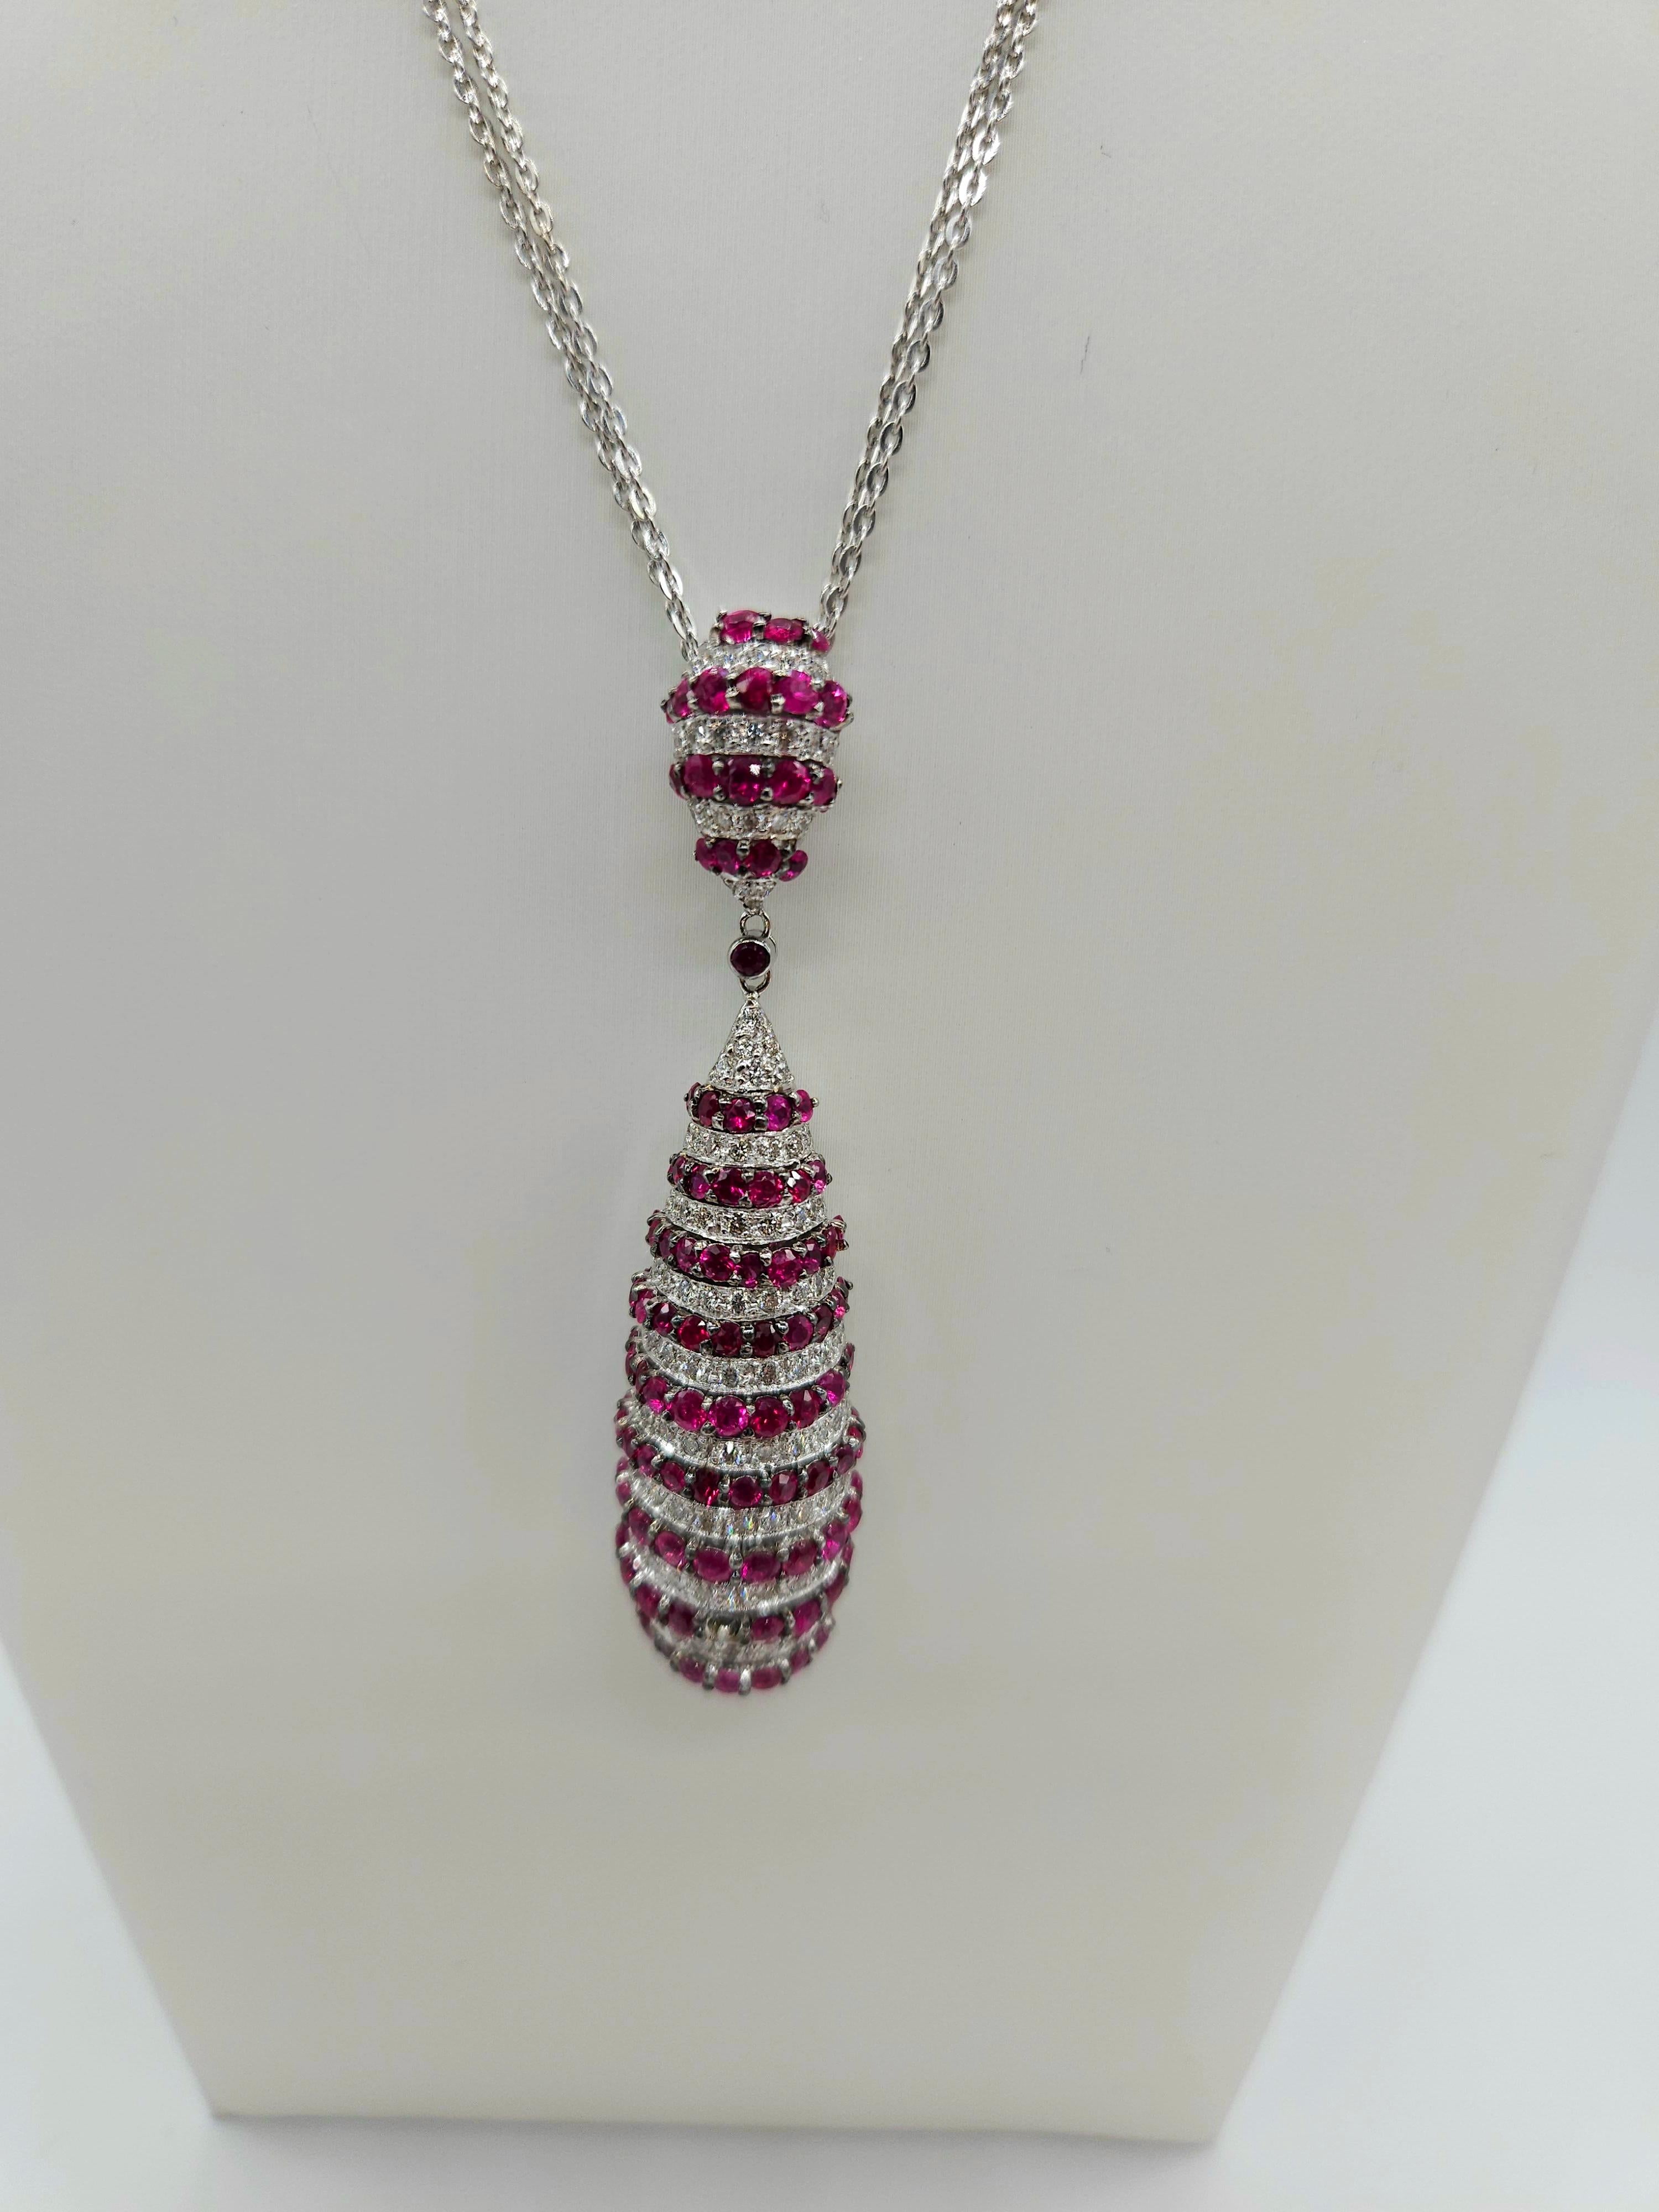 18k solid white gold drop pear shape diamonds and ruby necklace, Double link 18k ltalian chain With safety lock, Color H, Clarity VS, 21 INCH, 27.95 grams.

*Free Shipping within U.S*